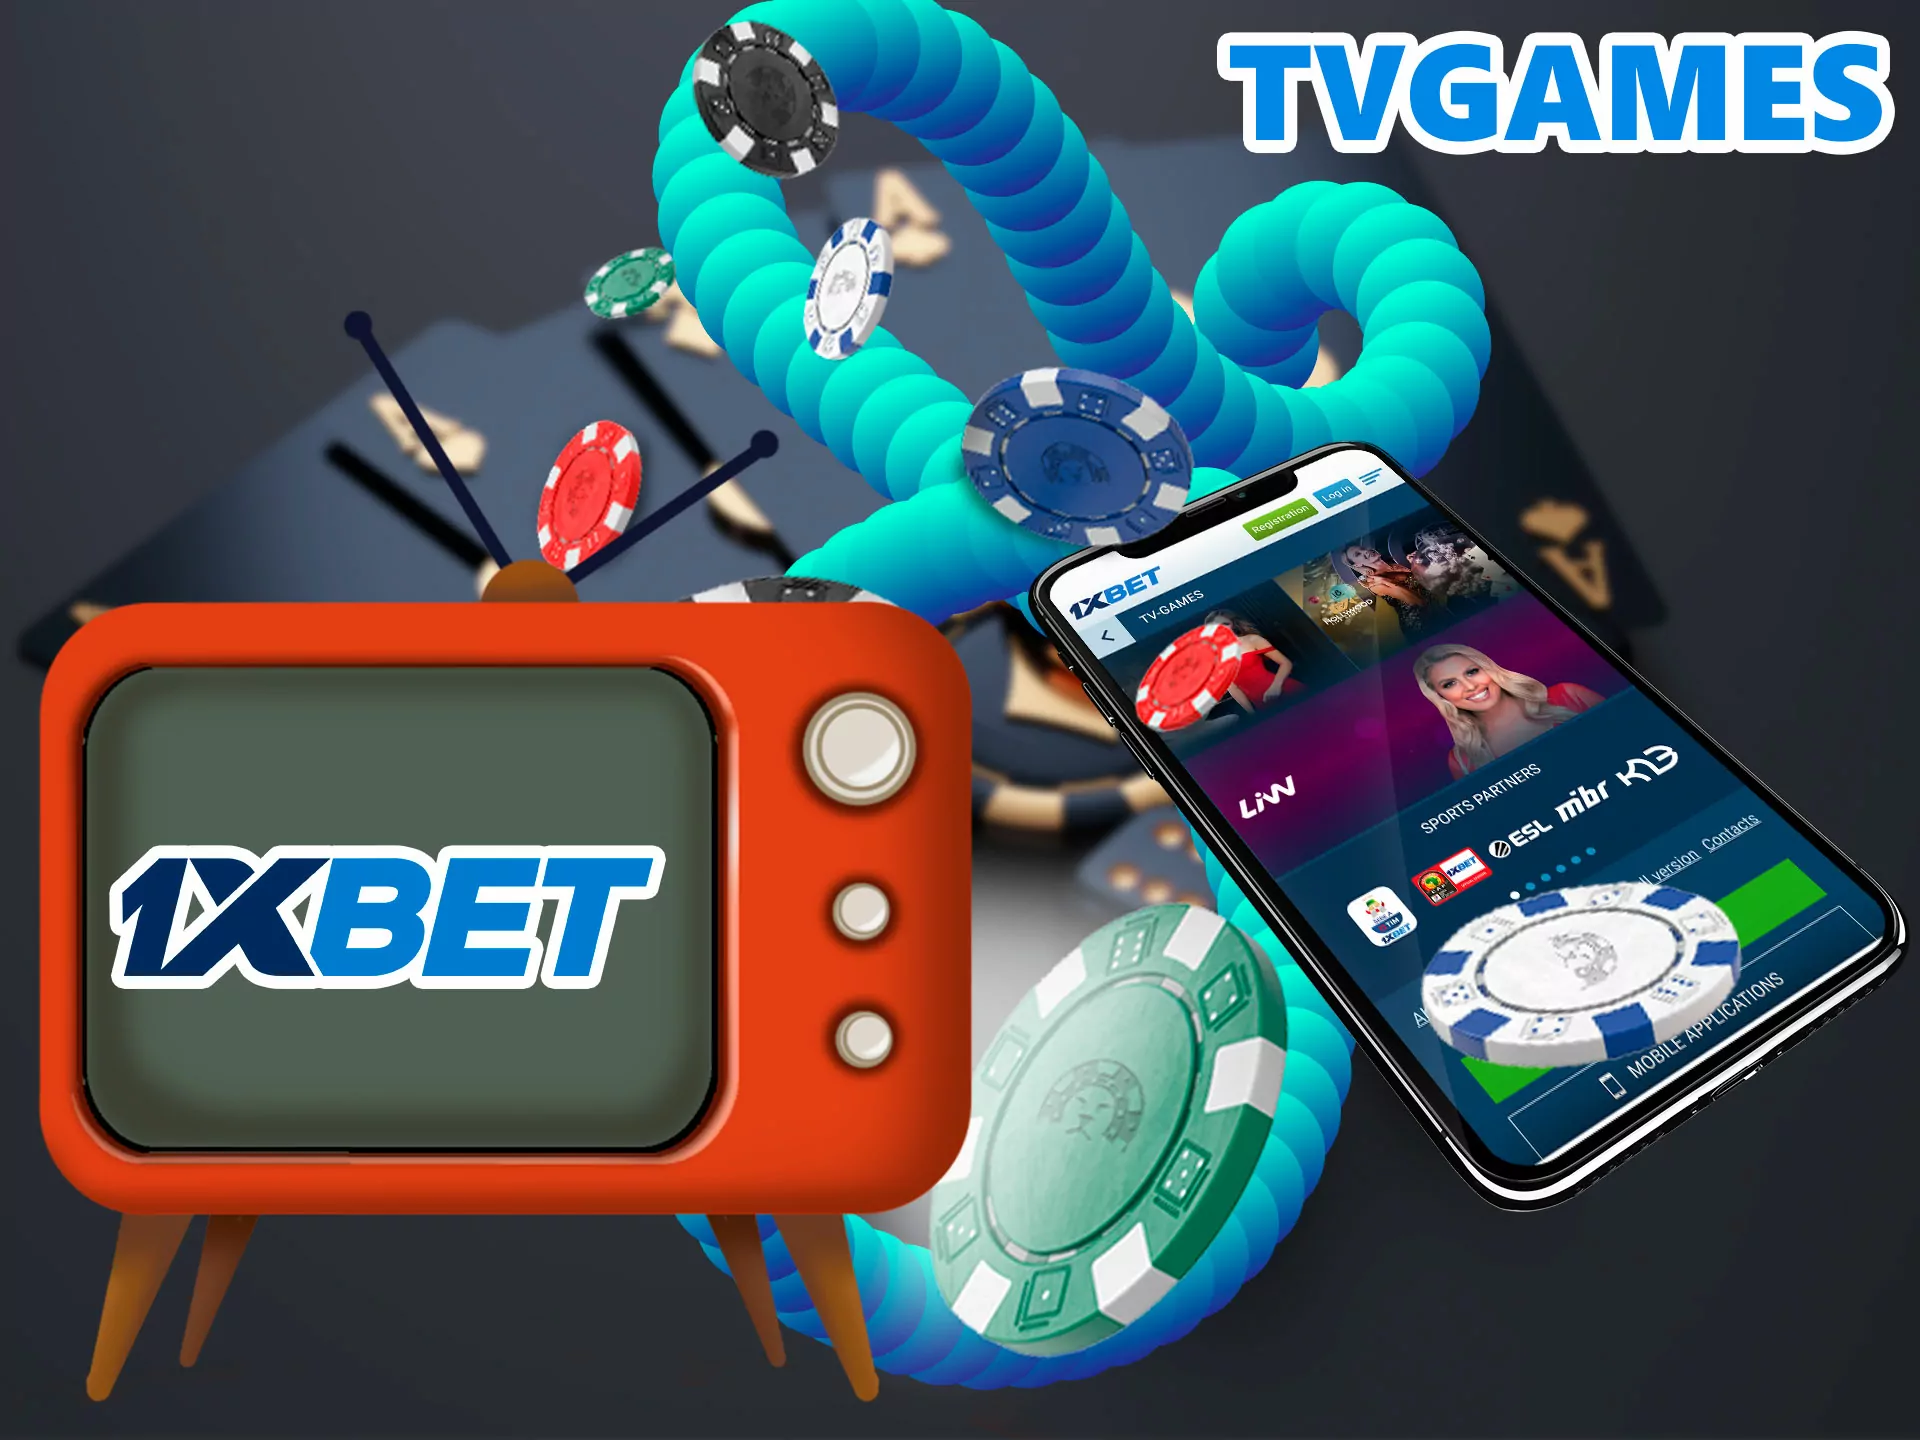 This section is primarily for connoisseurs of picture quality and professionalism of the dealer, here you will find: TVBET, Hollywood TV and Lotto Instant Win and many others.